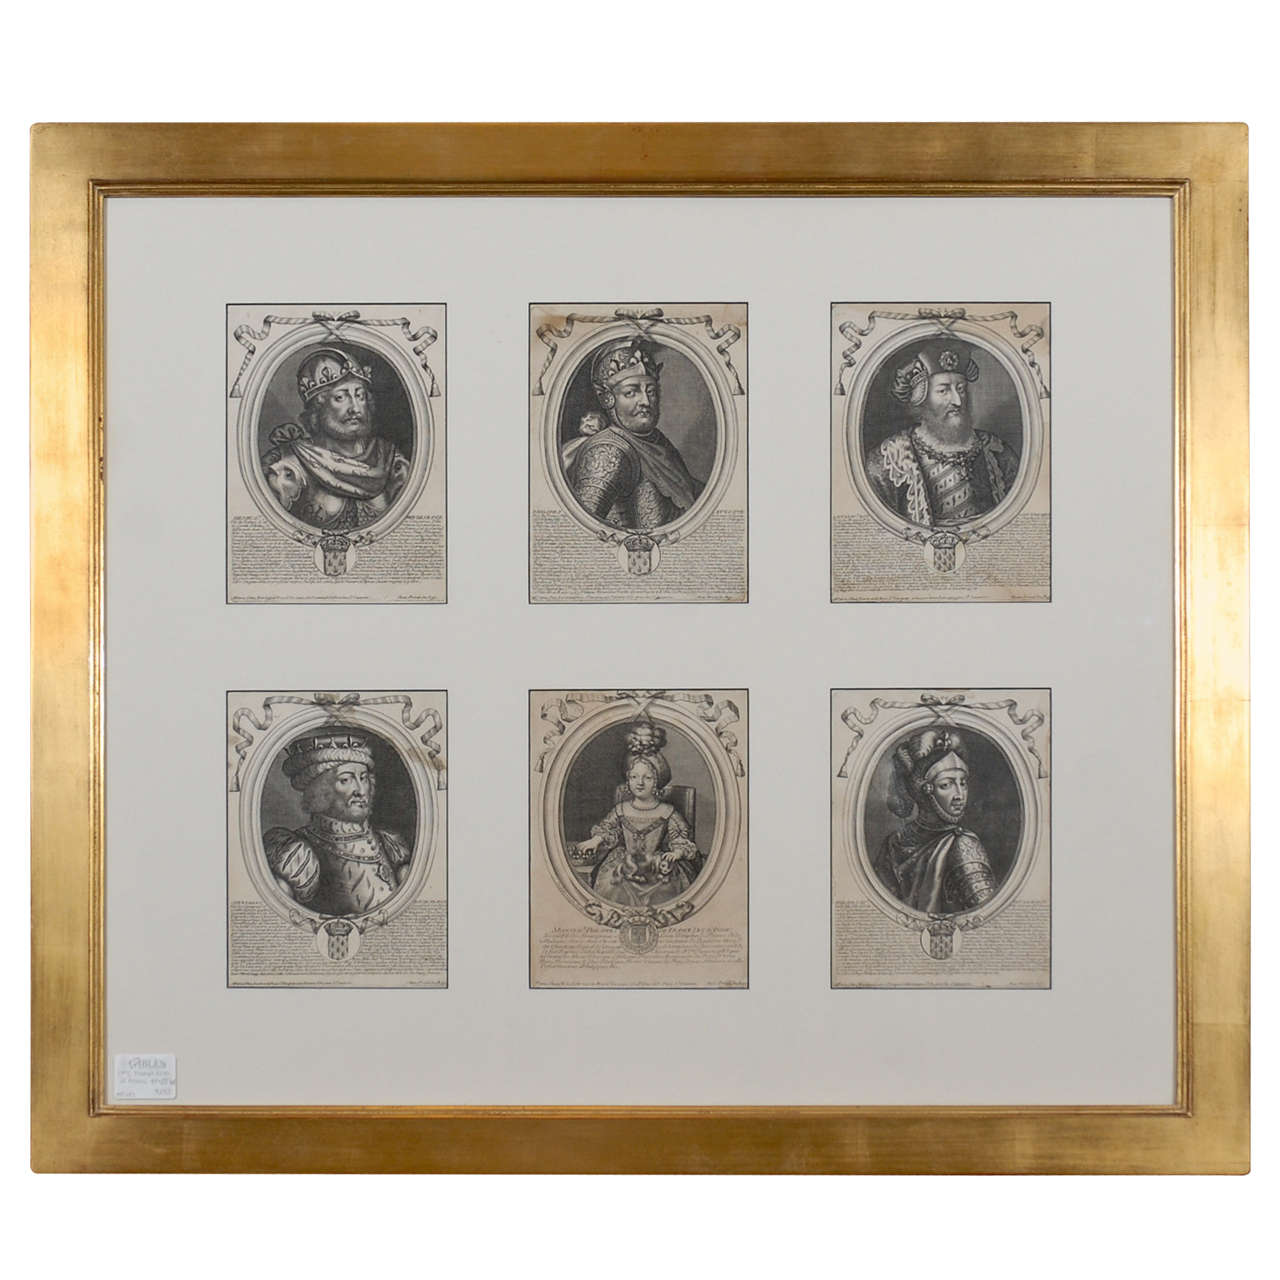 17th Century Engravings of French Kings Framed, Circa 1680